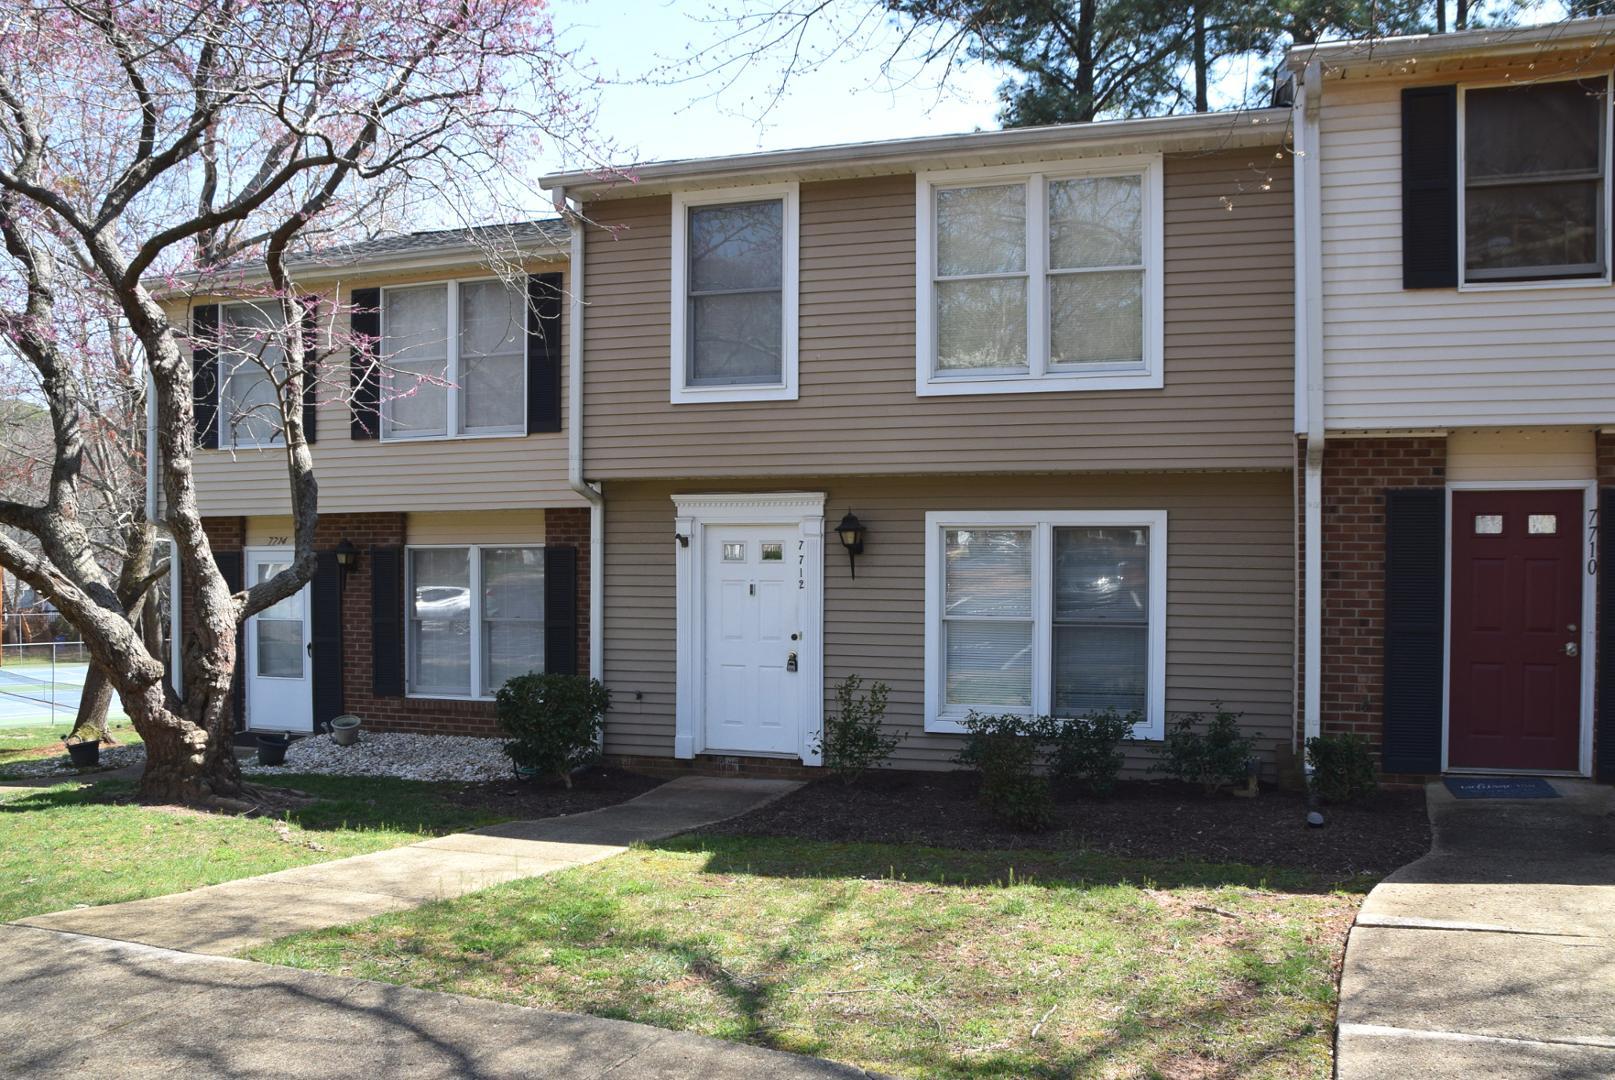 View Raleigh, NC 27615 townhome